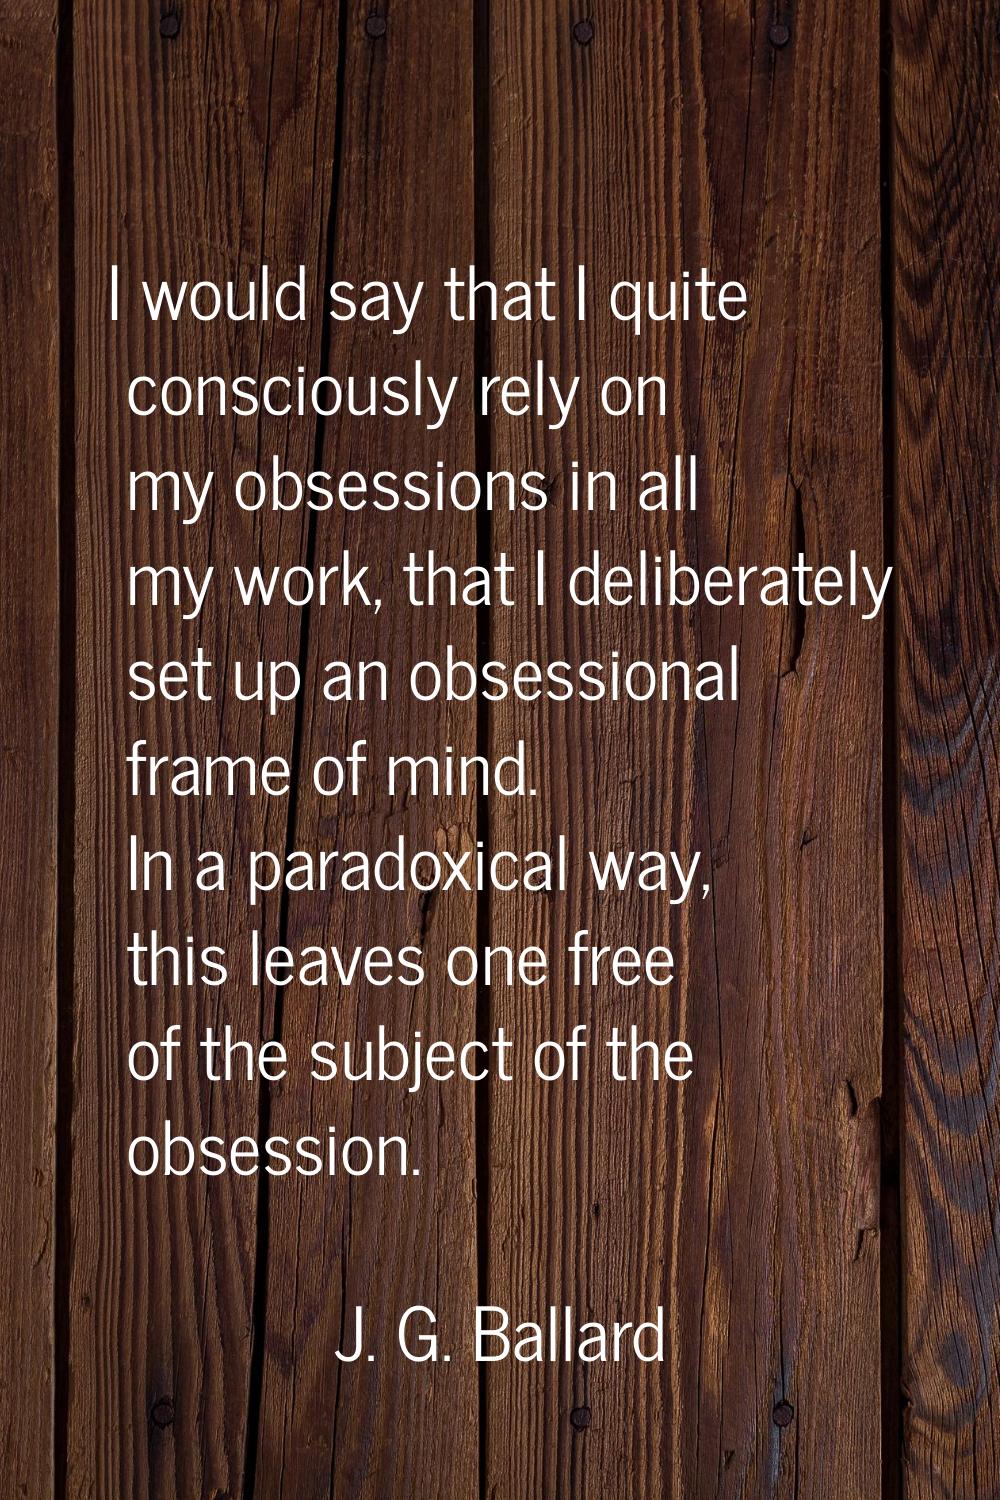 I would say that I quite consciously rely on my obsessions in all my work, that I deliberately set 